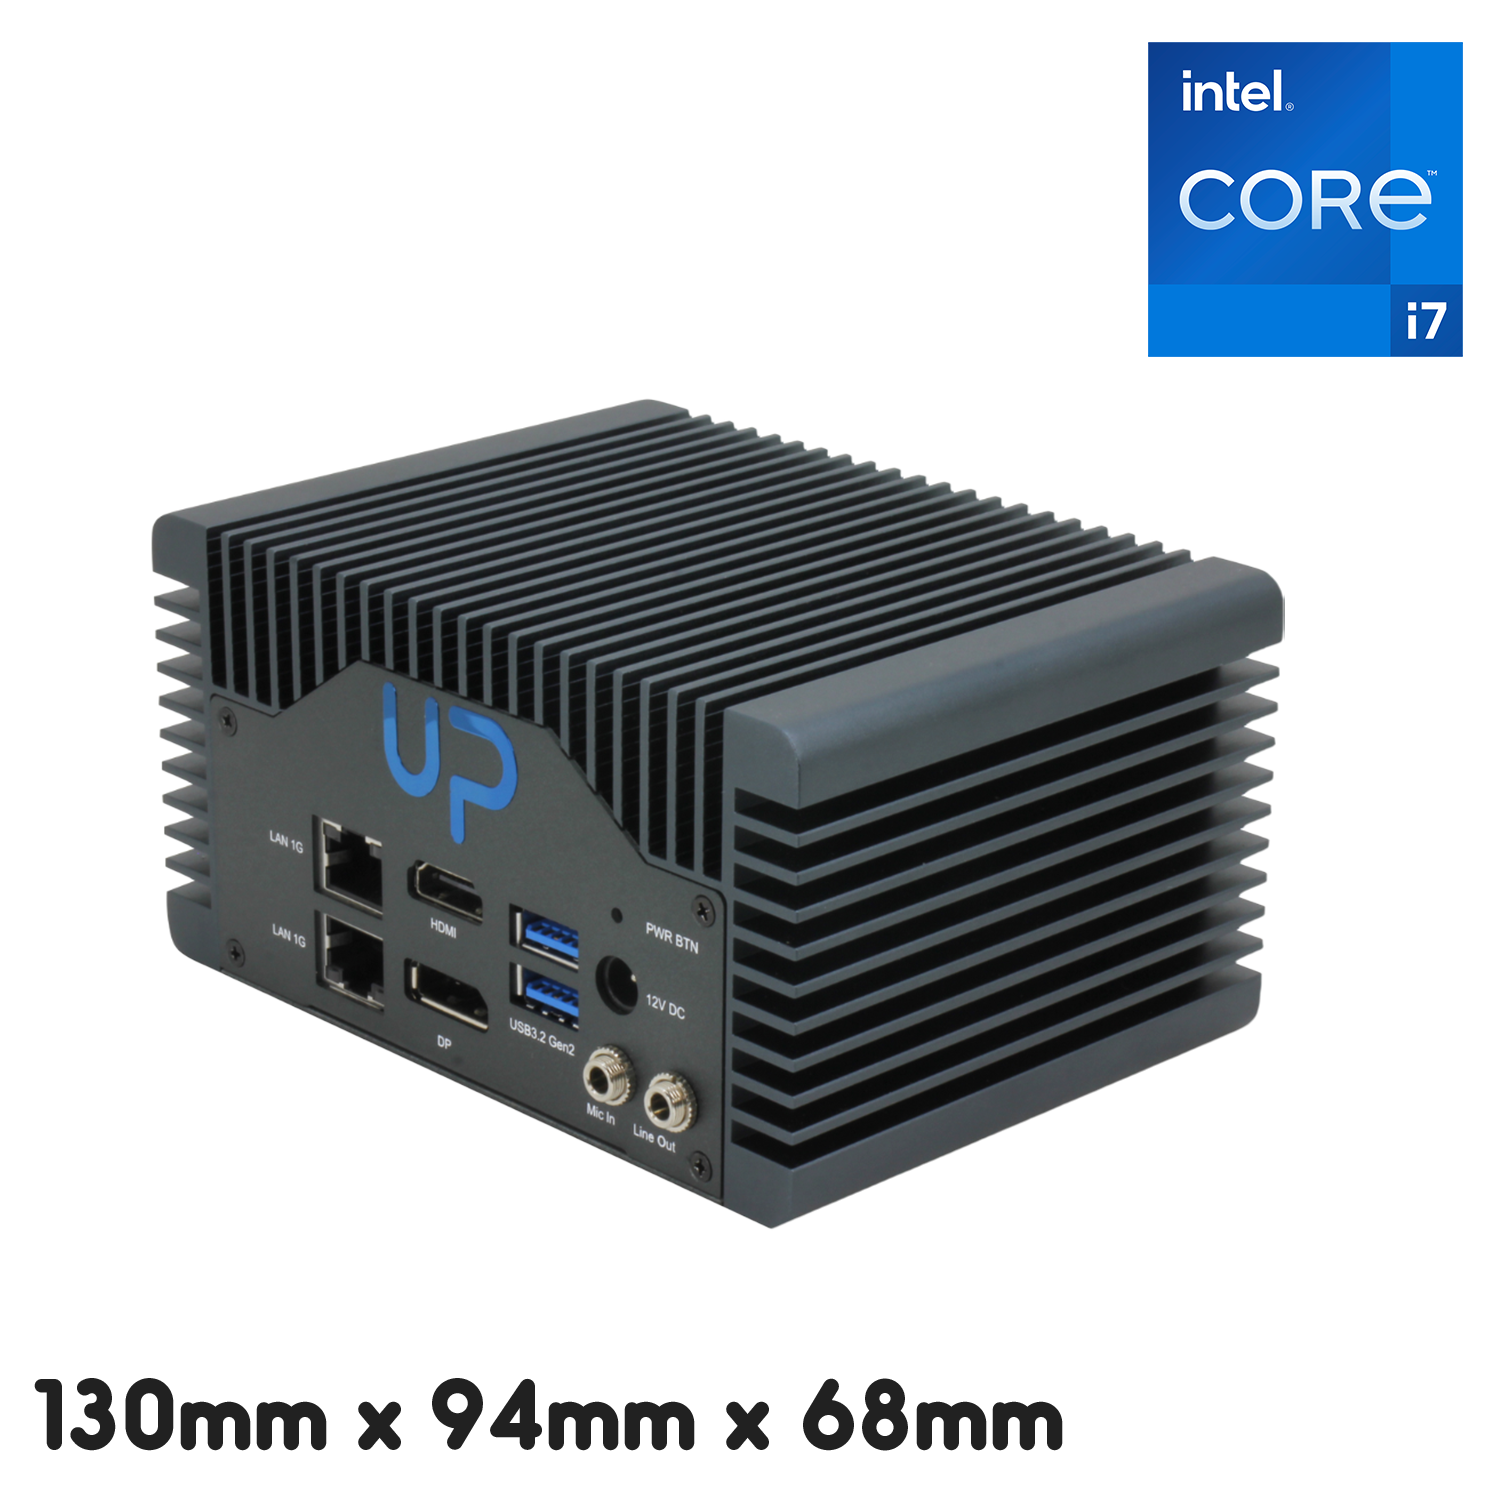 UP Squared i12 Edge embedded system front view